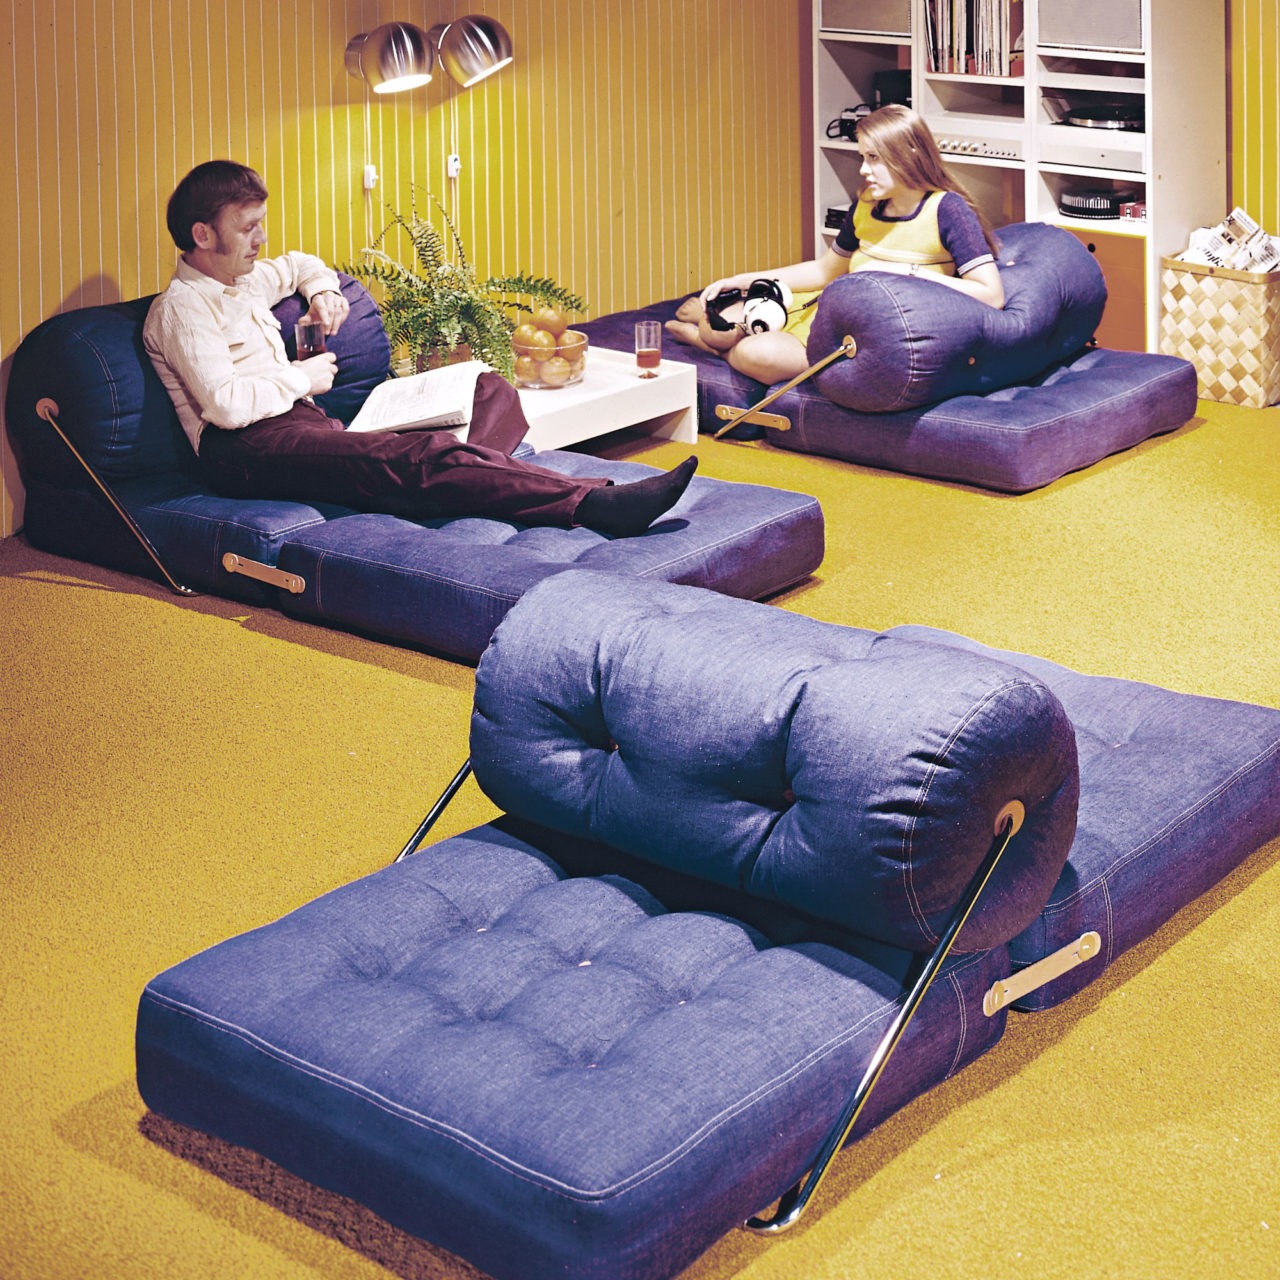 Denim-covered TAJT cushions, folded out as divans and spread out on the floor in a yellow-carpeted room.